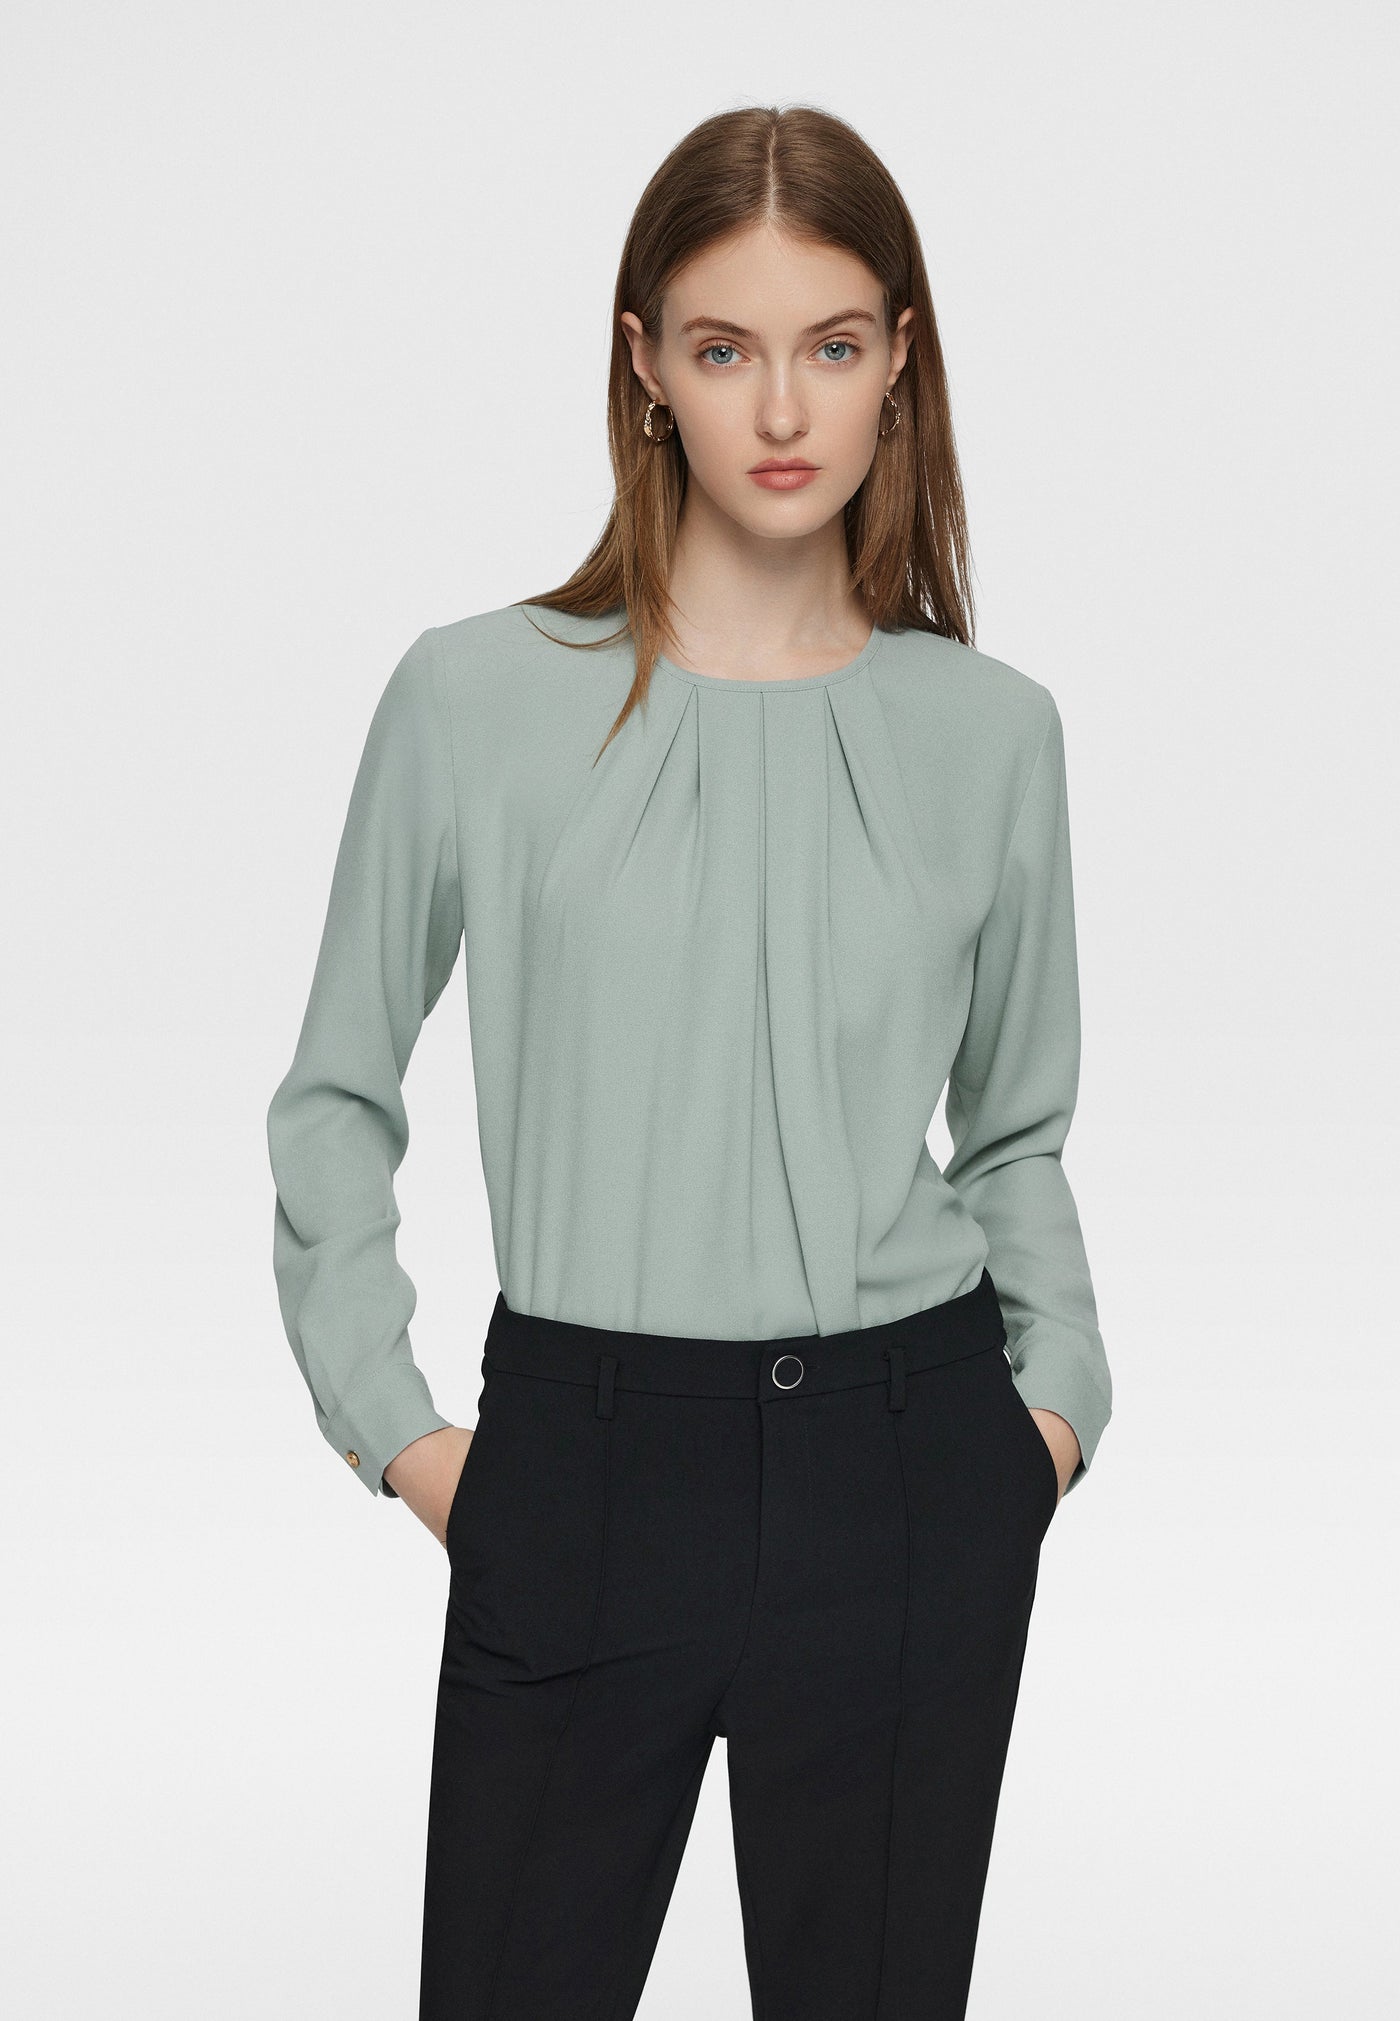 Women Clothing Bessie Poly Crepe Crinkle Blouse - Regular Fit